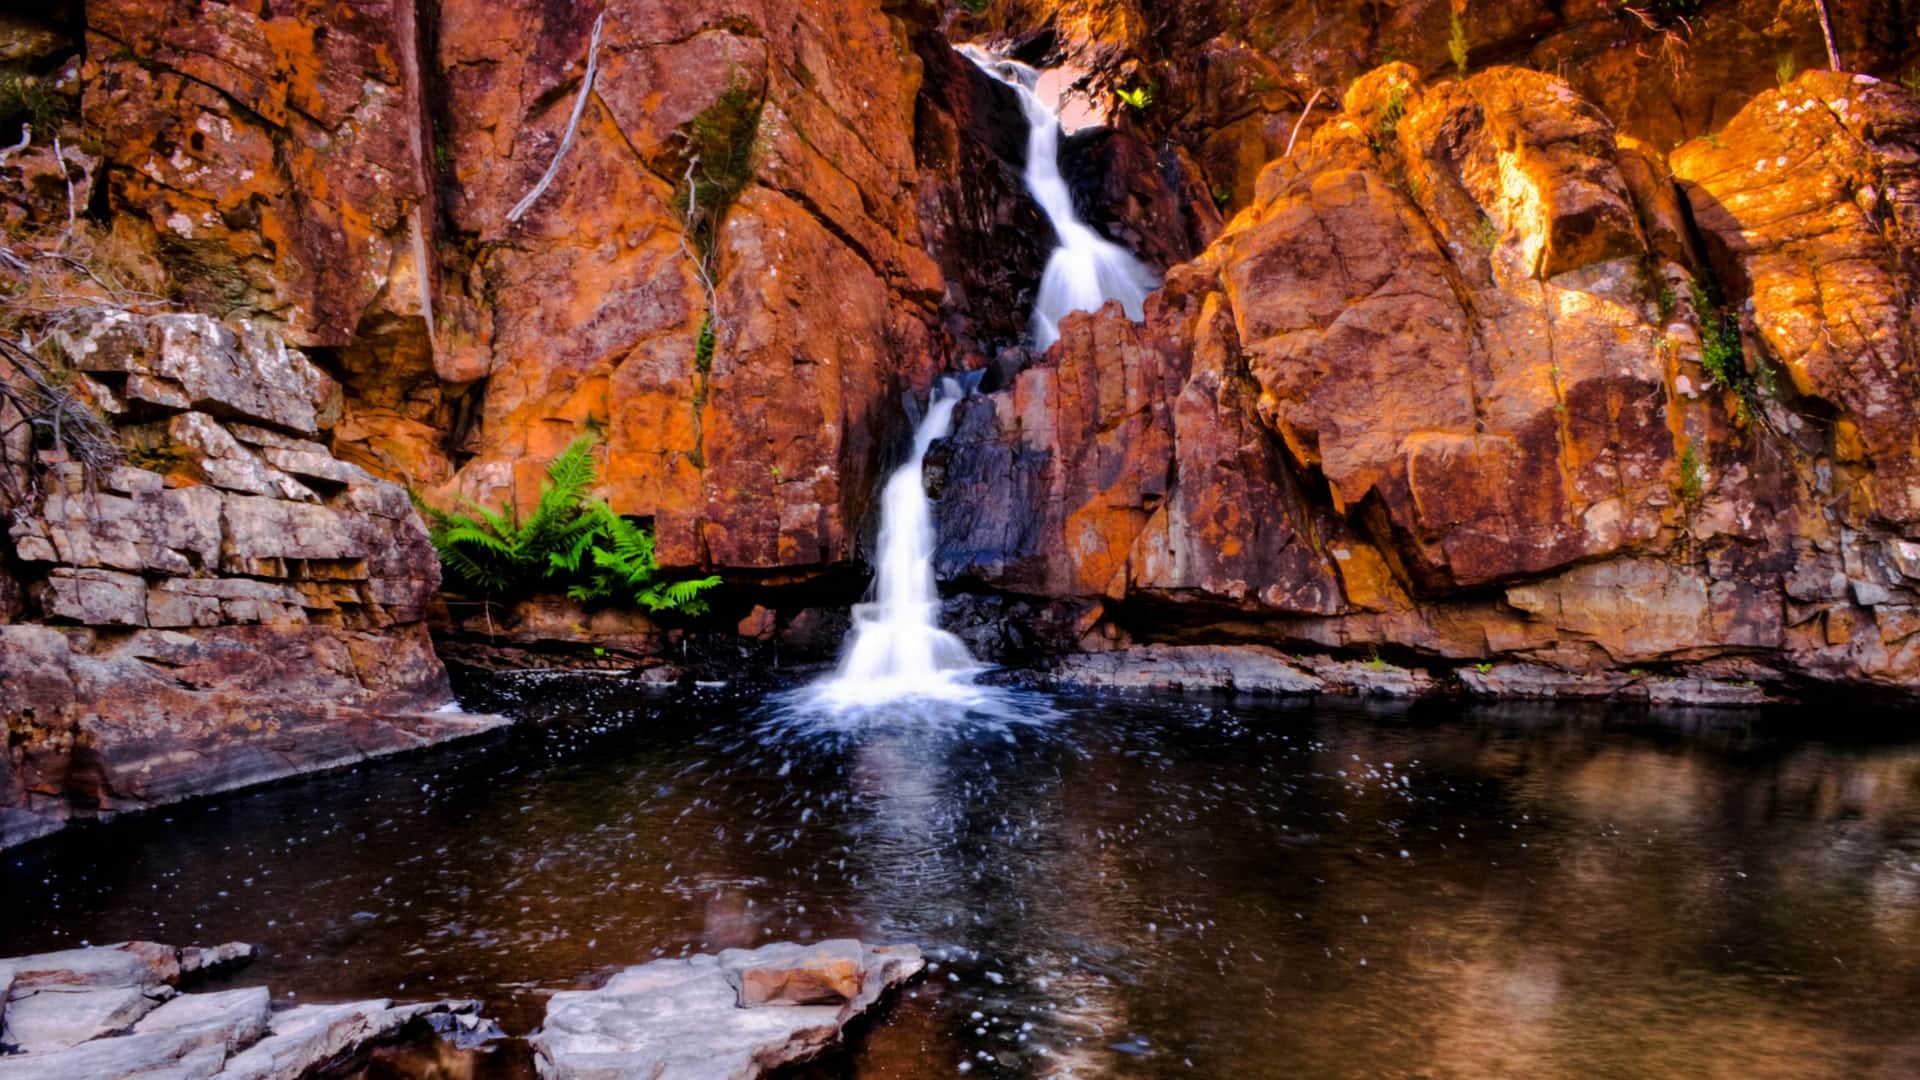 Visit Australia for: A waterfall and plunge pool in Nitmiluk Gorge